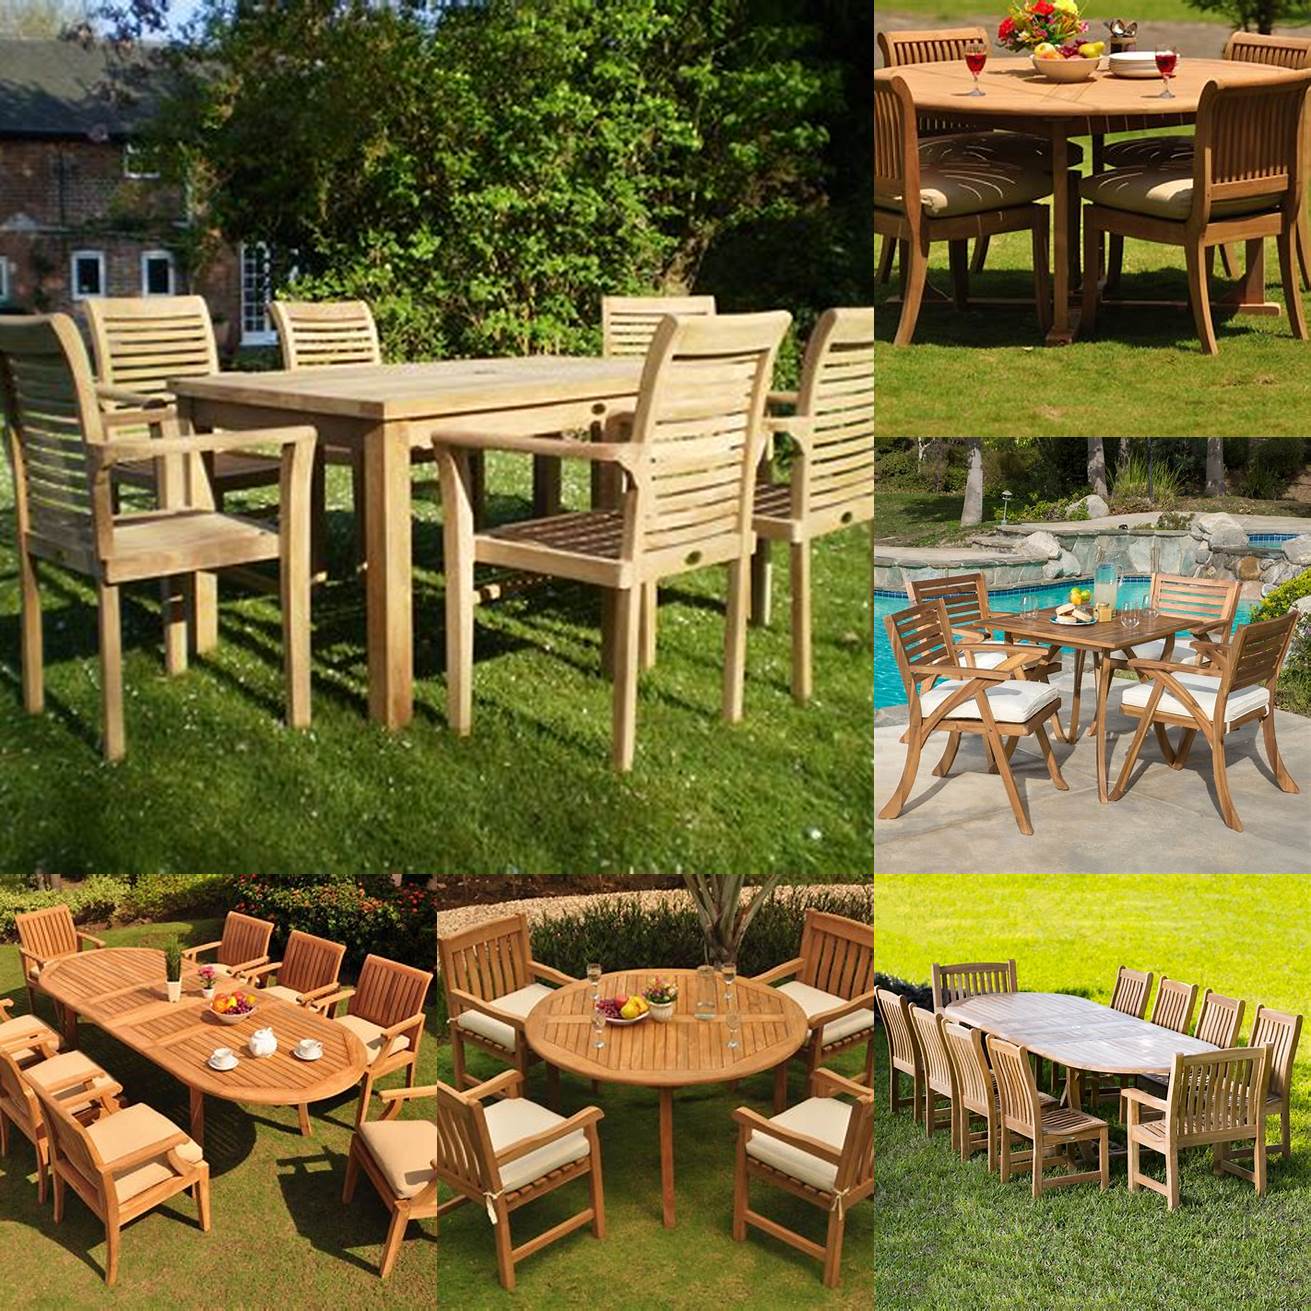 Picture of a teak garden furniture set in an outdoor space